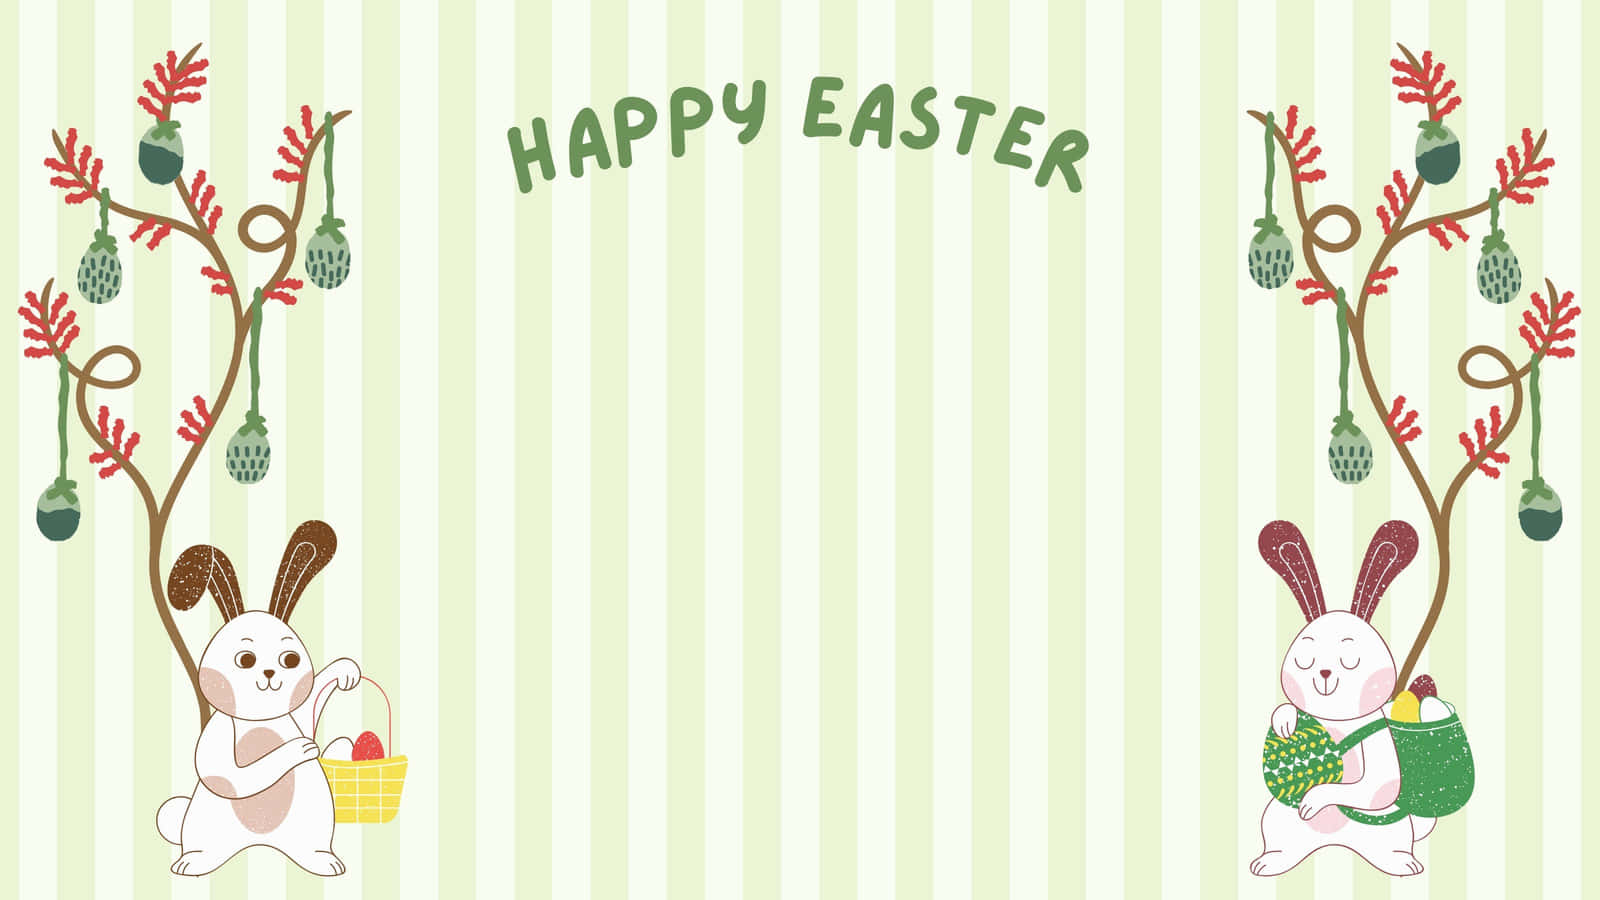 Celebrate Easter this year with a virtual Zoom celebration featuring this festive background!